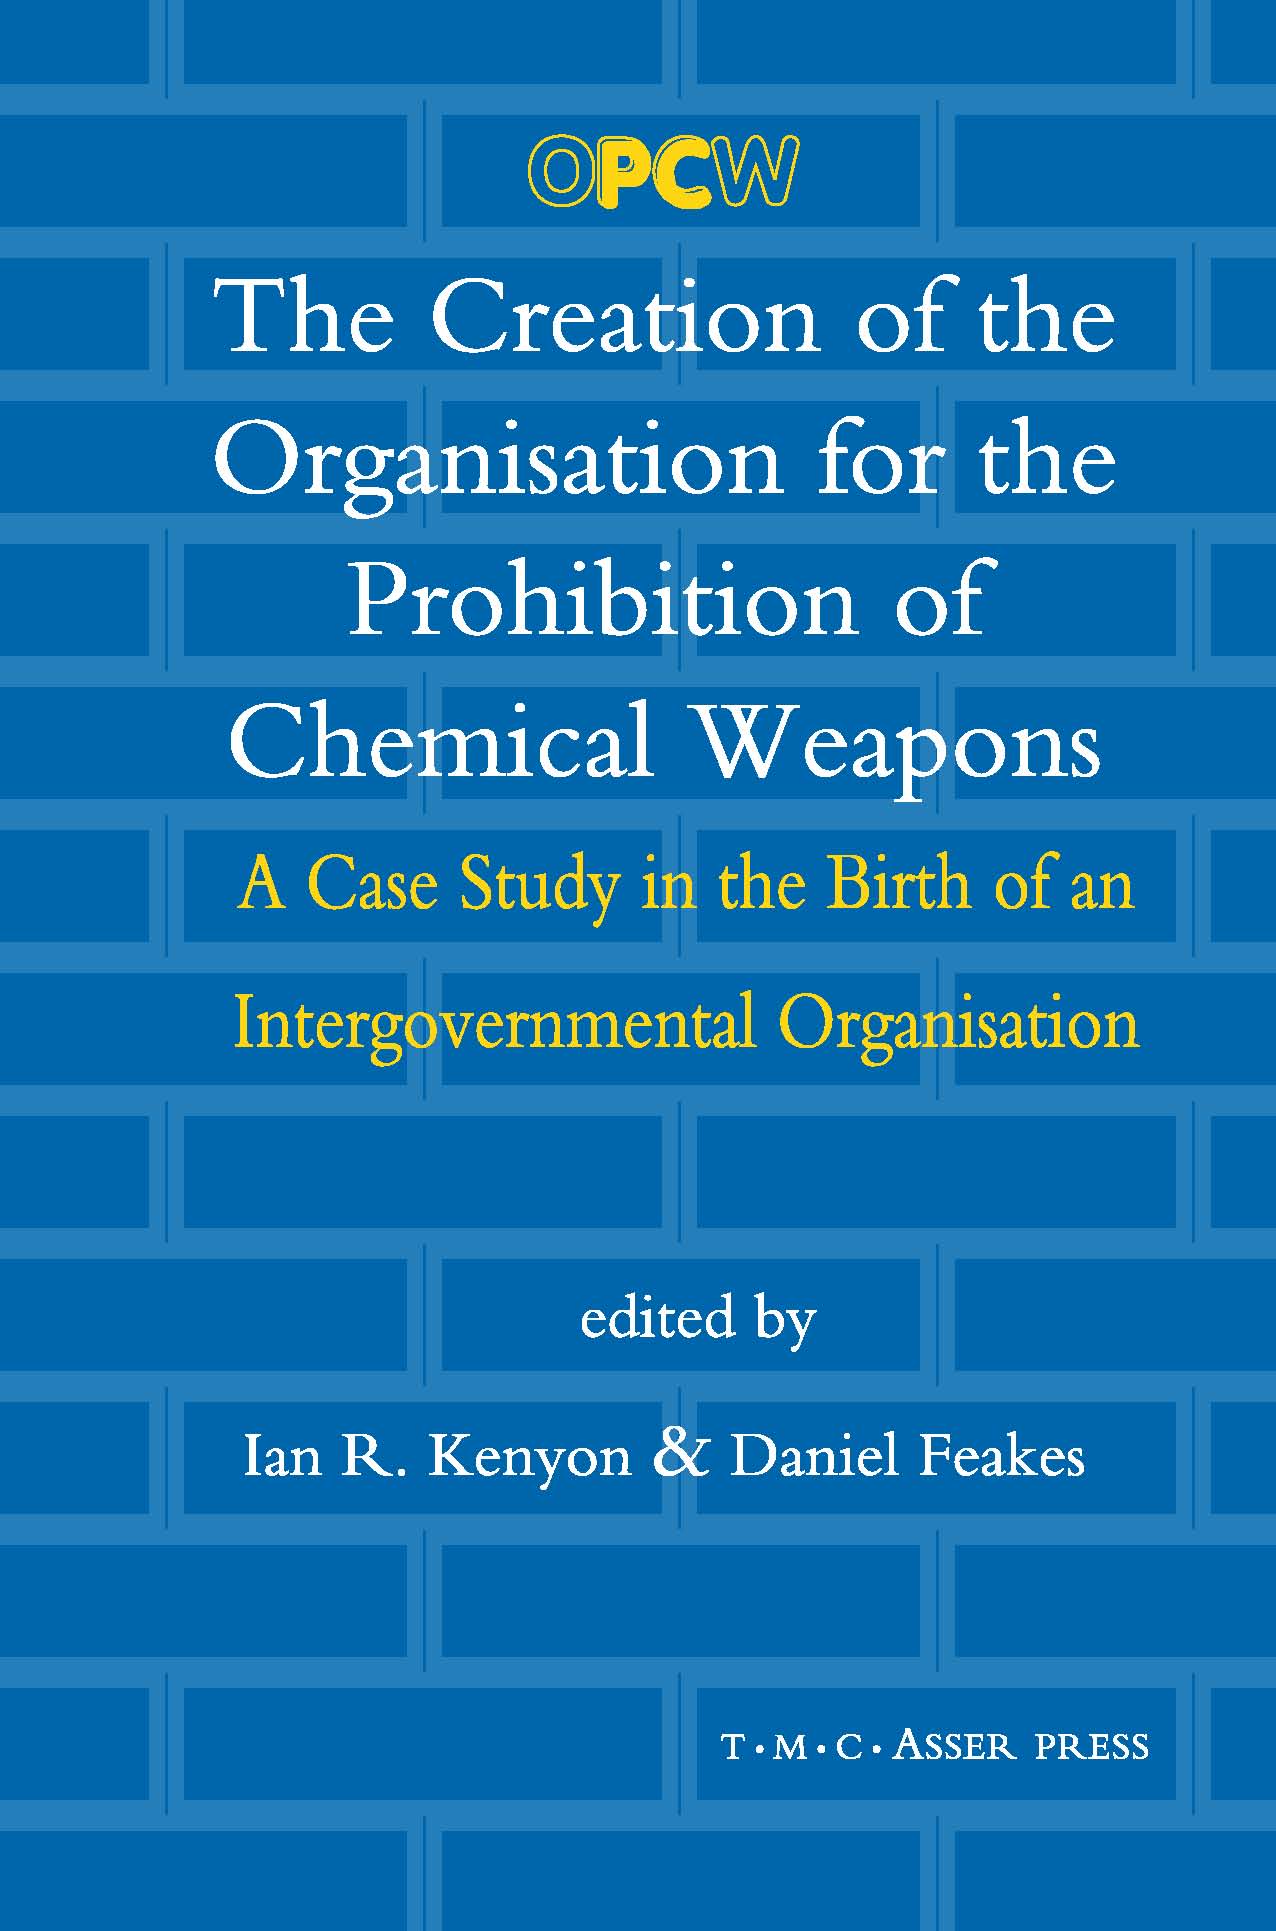 The Creation of the Organisation for the Prohibition of Chemical Weapons - A Case Study in the Birth of an Intergovernmental Organisation